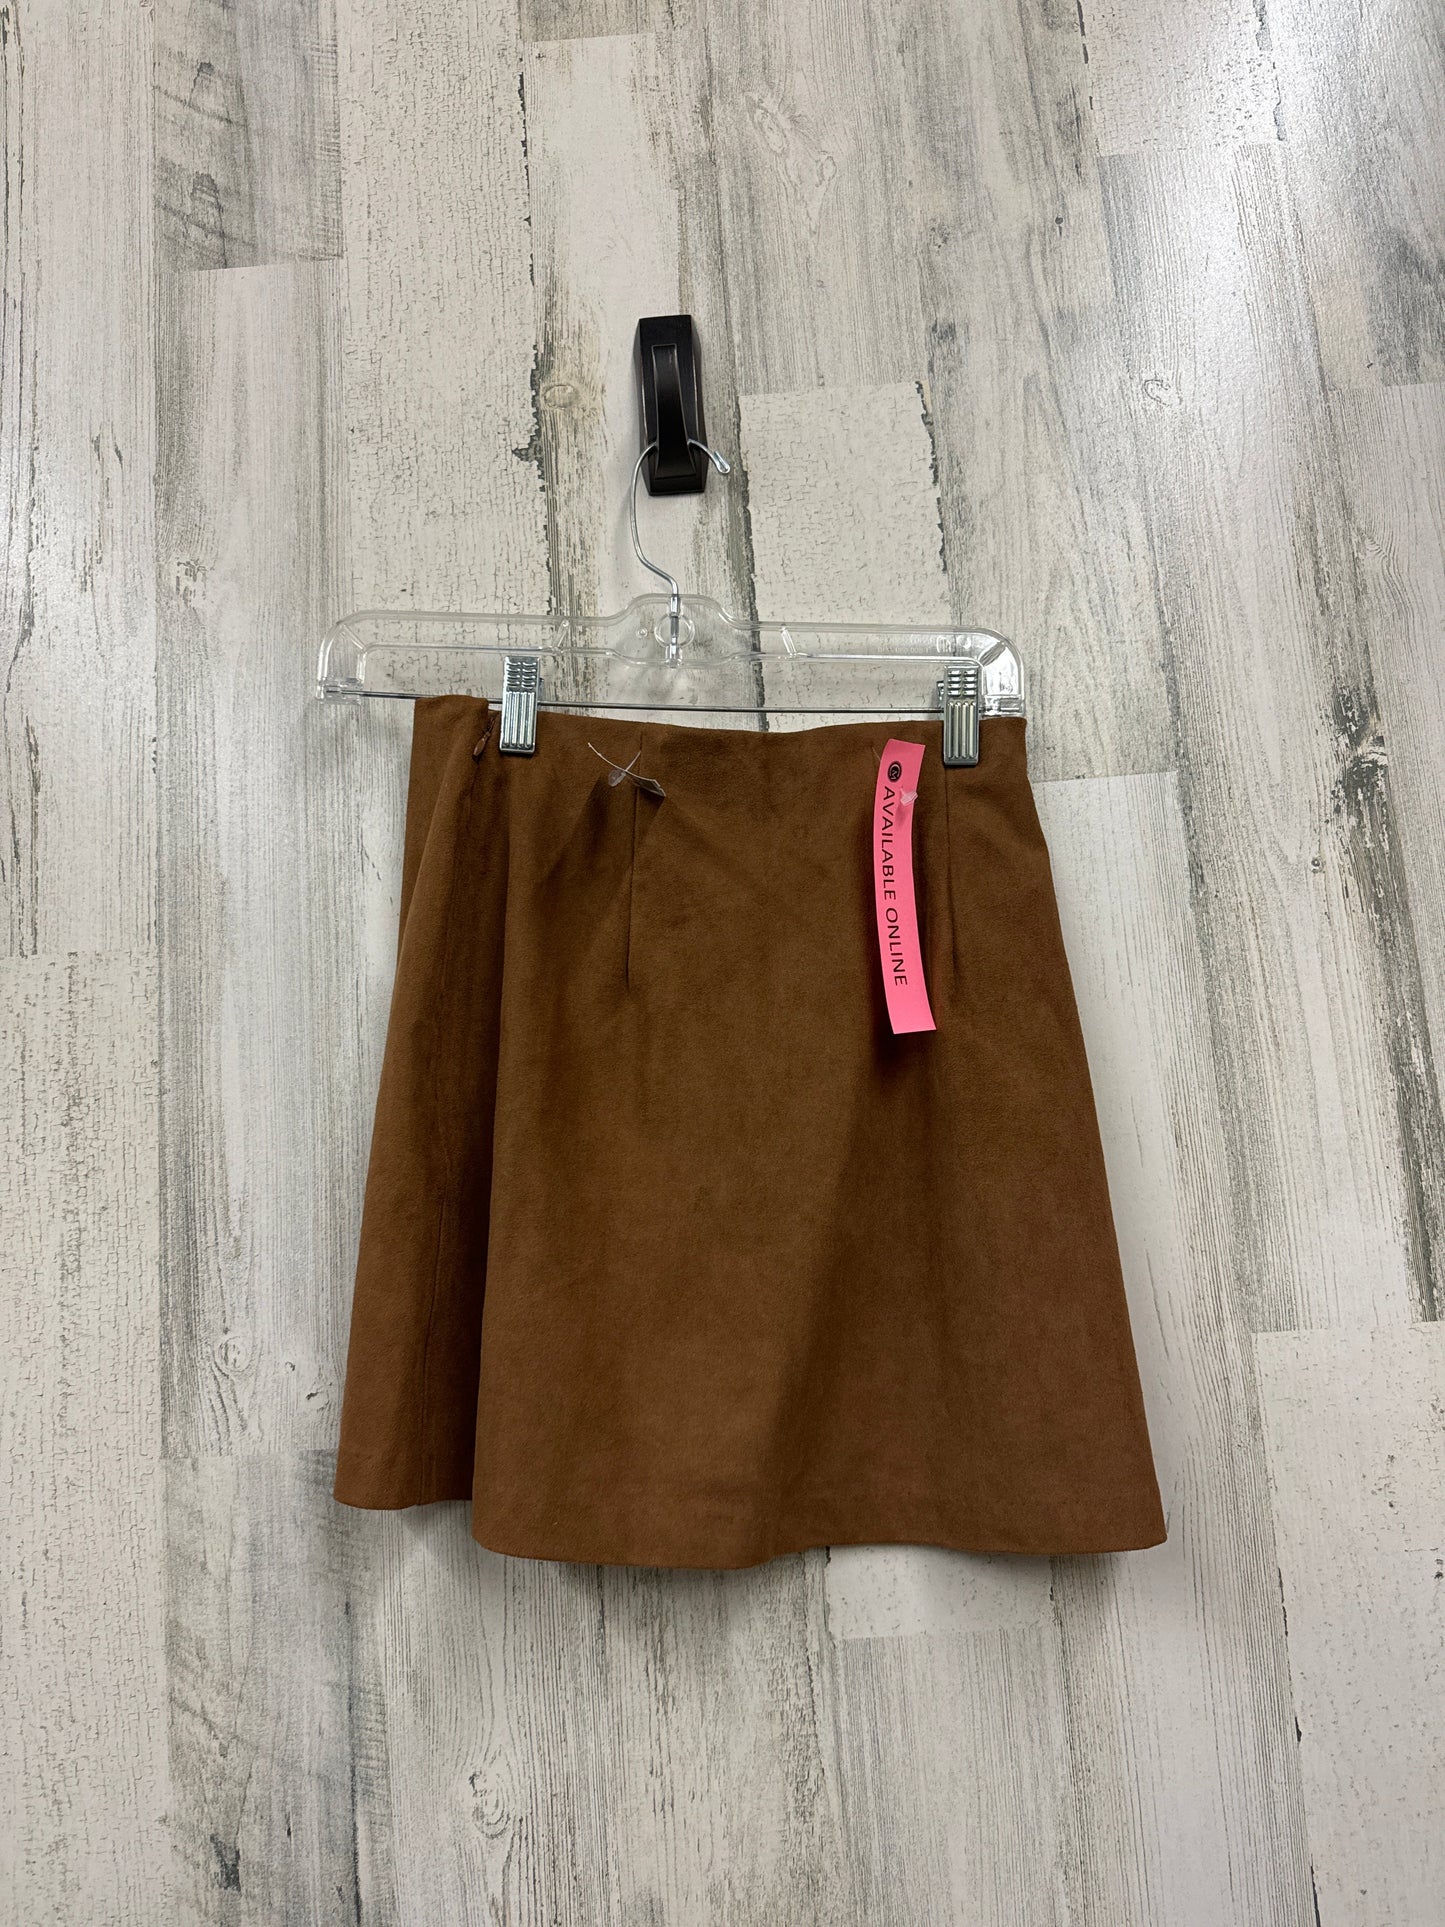 Skirt Mini & Short By Abercrombie And Fitch  Size: Xs